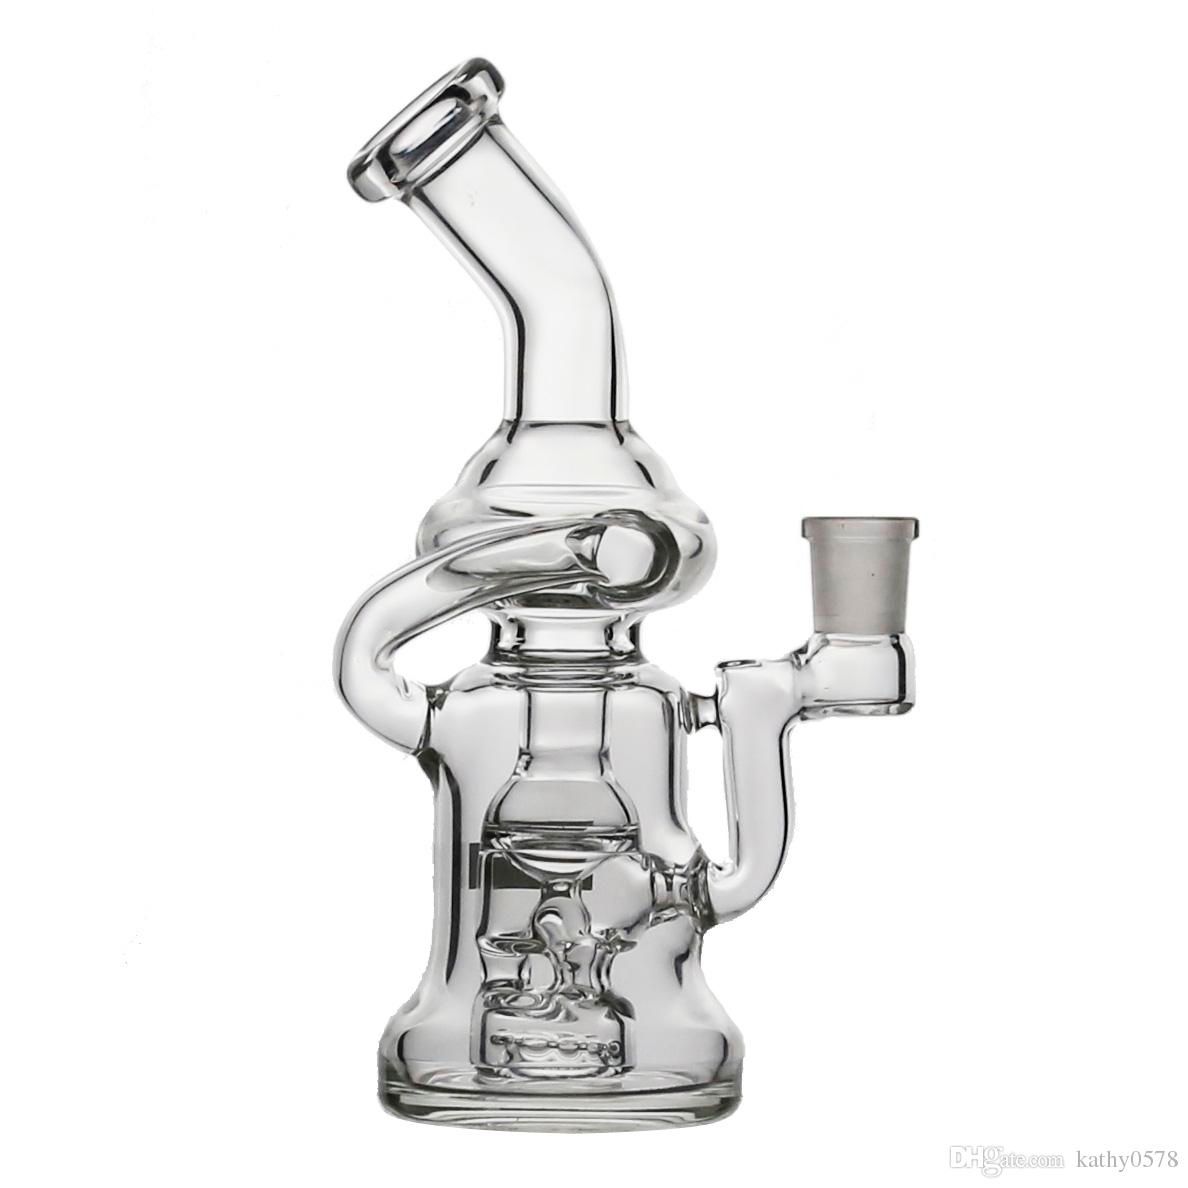 2015%20New%20Bong%20glass%20water%20pipe%20glass%20bong%20recycler%20bong%20water%20pipe%20two%20function%20with%20oil%20rig%20herb%20bowl%20free%20shipping%2014.5%20mm%20joint.jpg